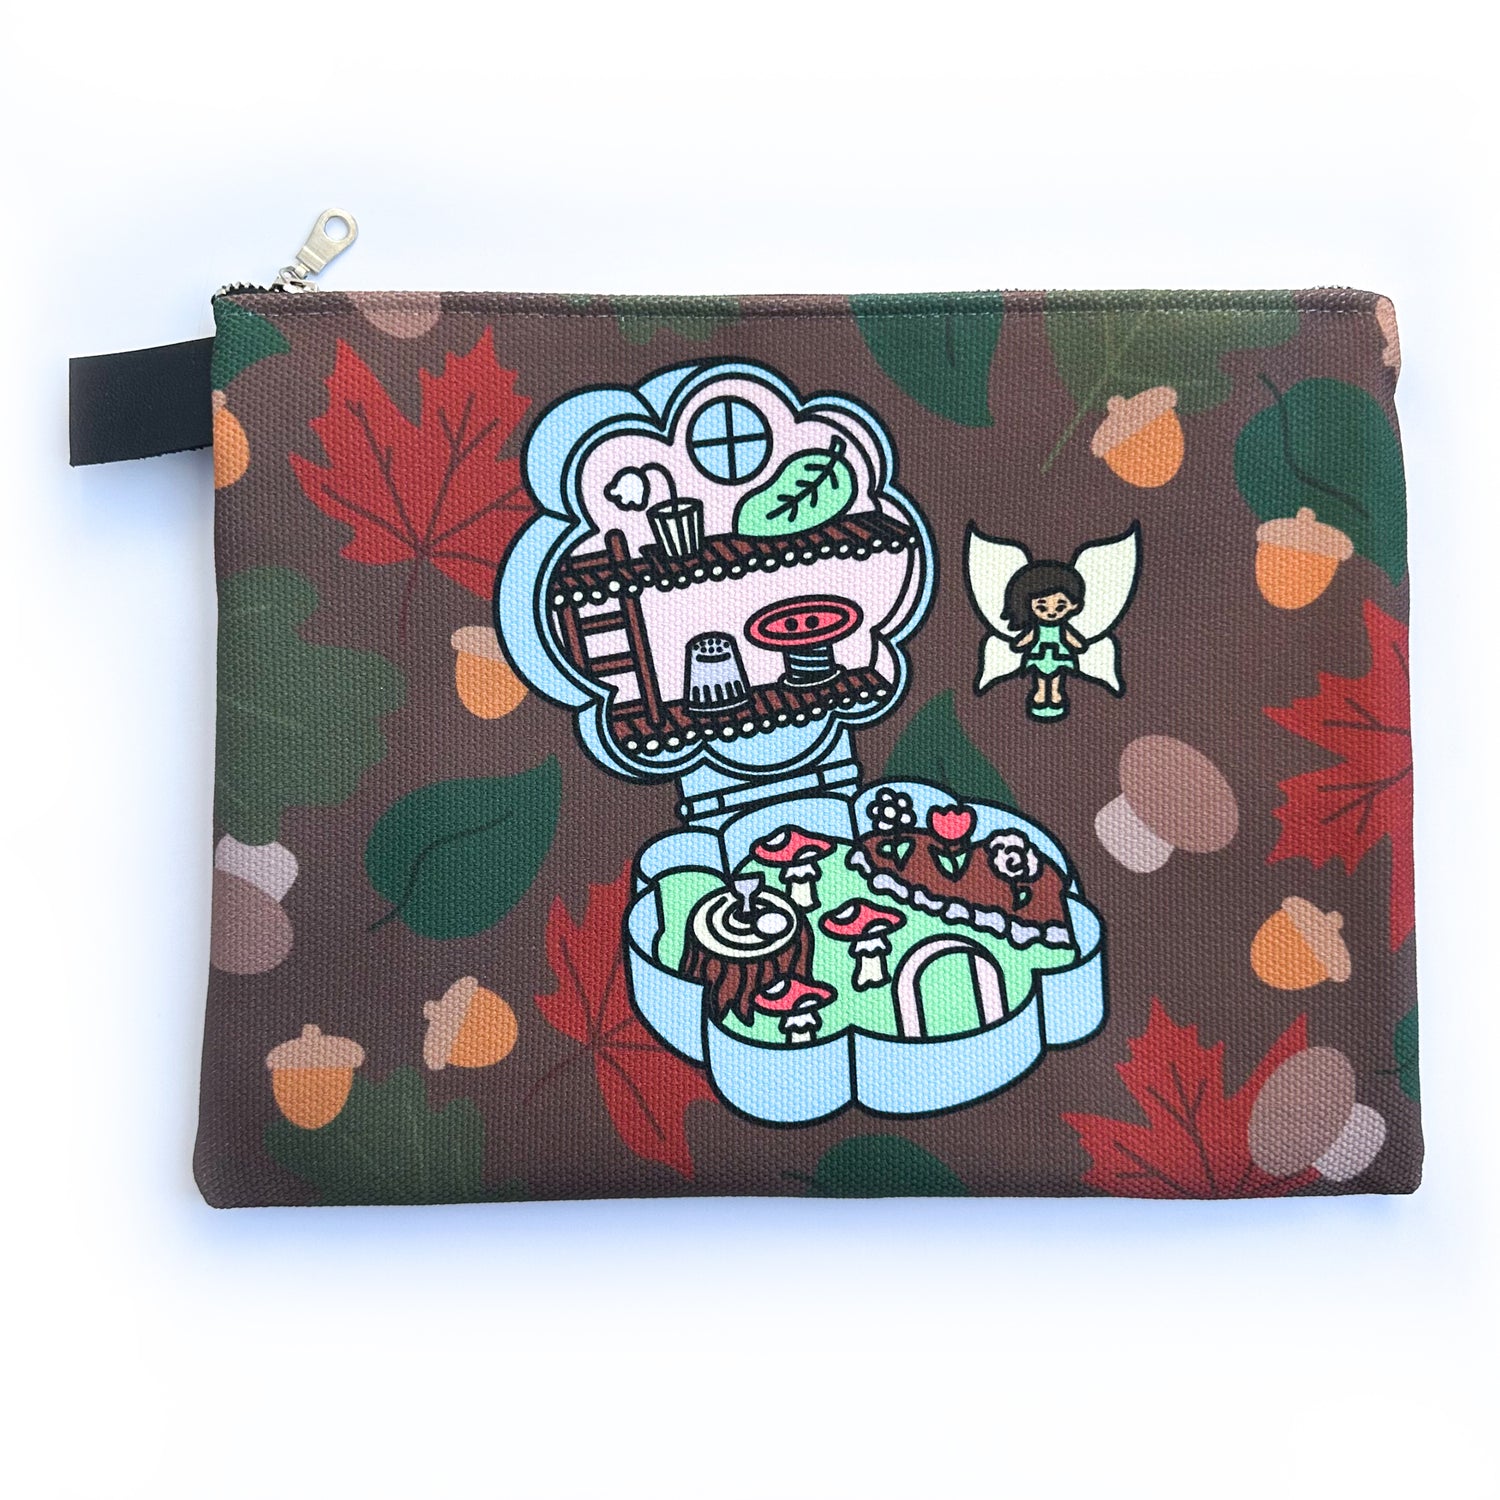 A flat zipper bag with an illustration of a fairy polly pocket compact on it with a background of fall leaves and acorns.